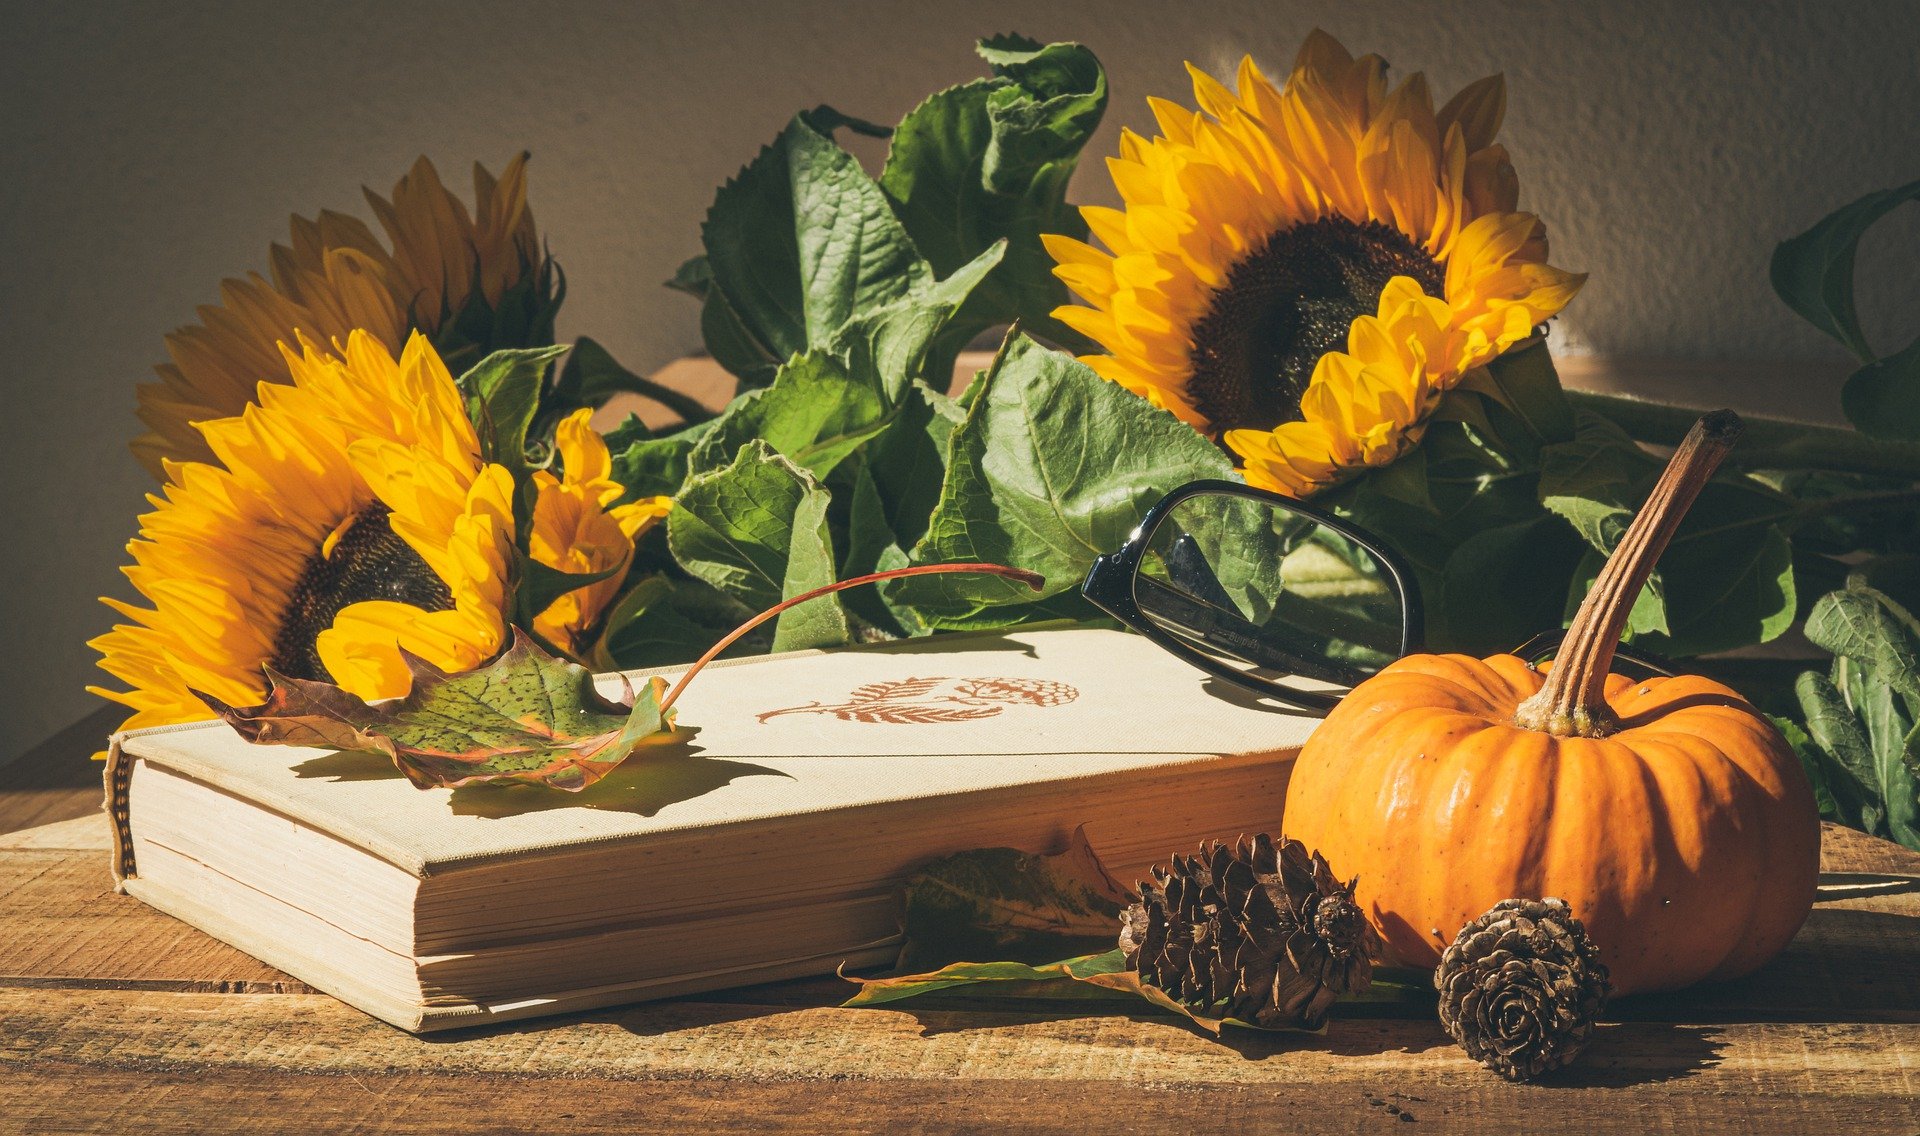 Book with sunflowers, pumpkin and pinecones.